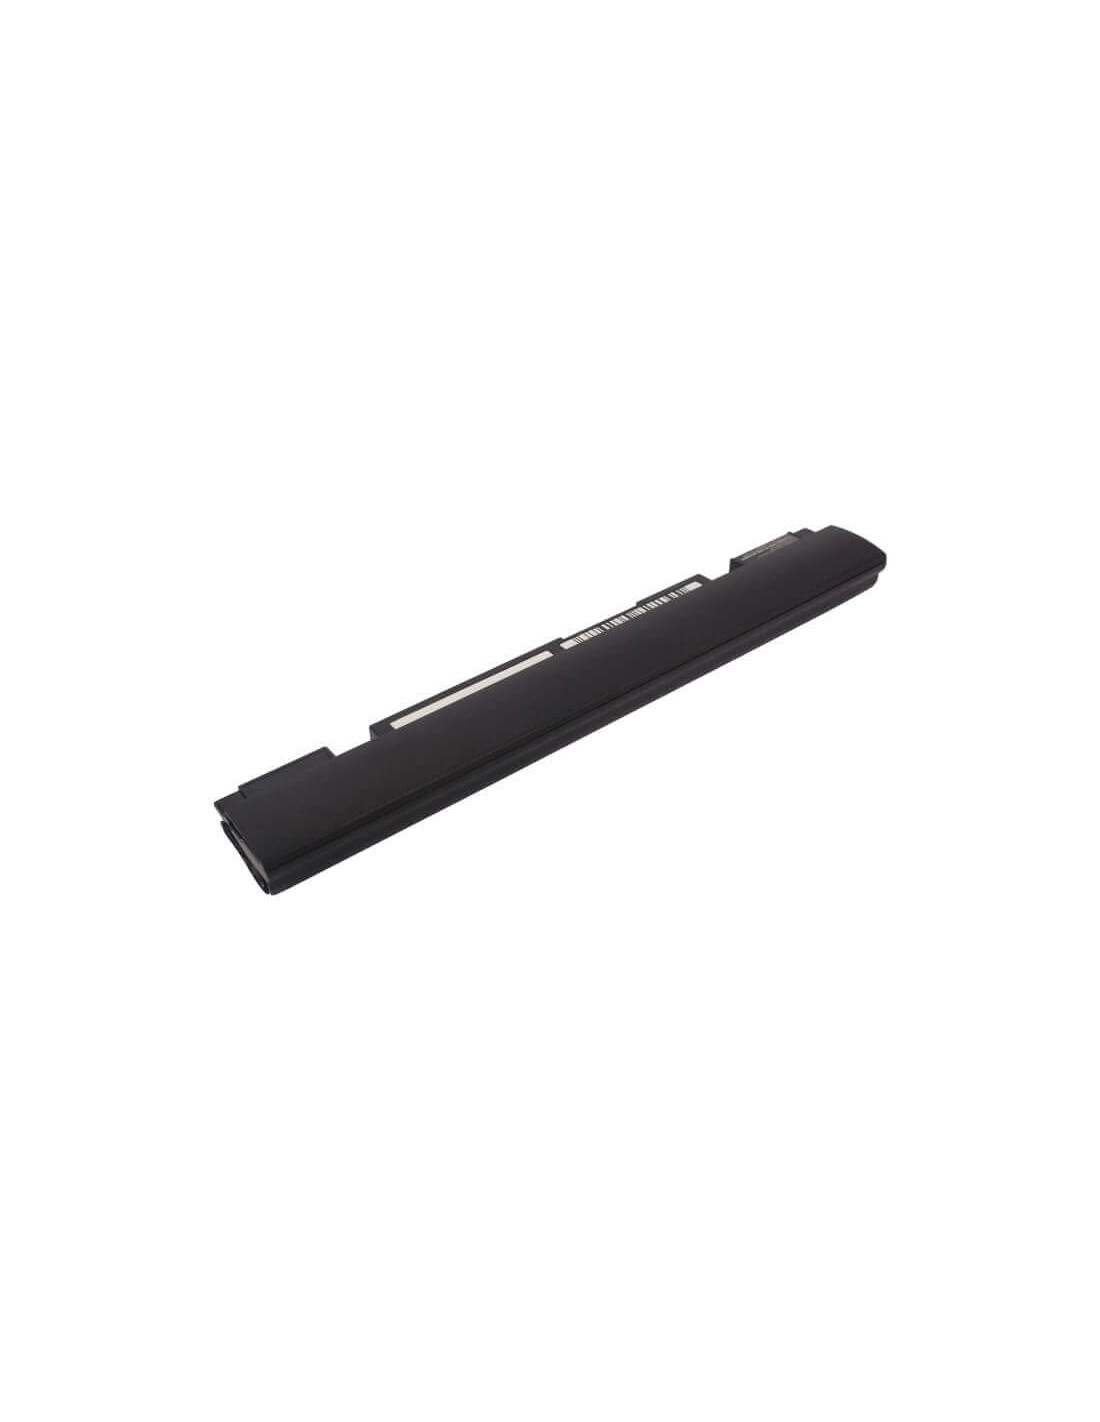 Black Battery for Asus Eee Pc X101, Eee Pc X101c, Eee Pc X101ch 10.8V, 2200mAh - 23.76Wh